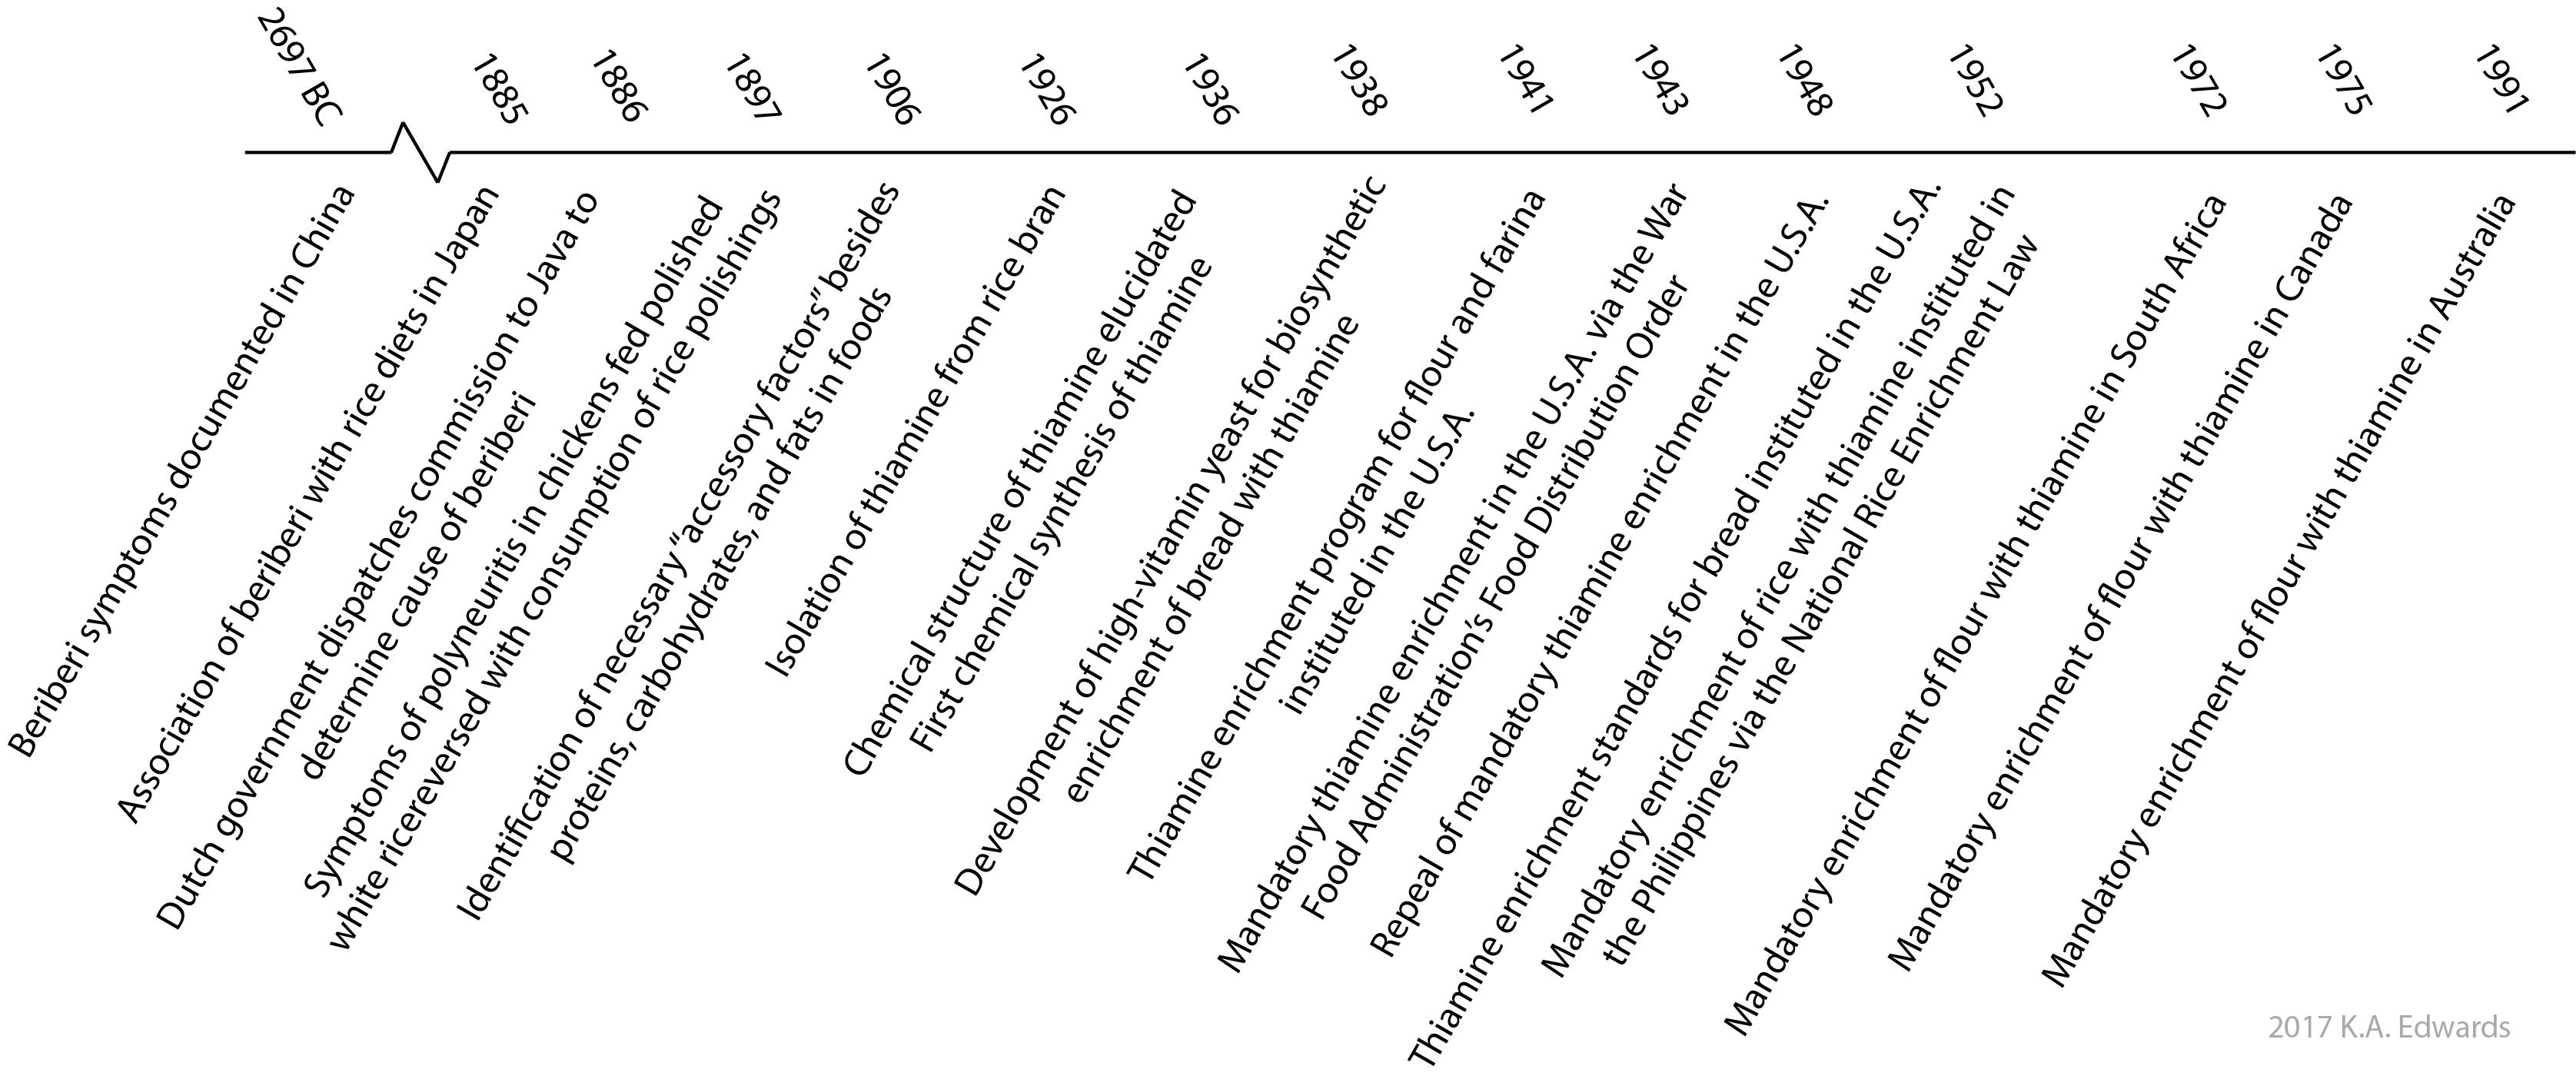 timeline of dietary link to thiamine deficiency